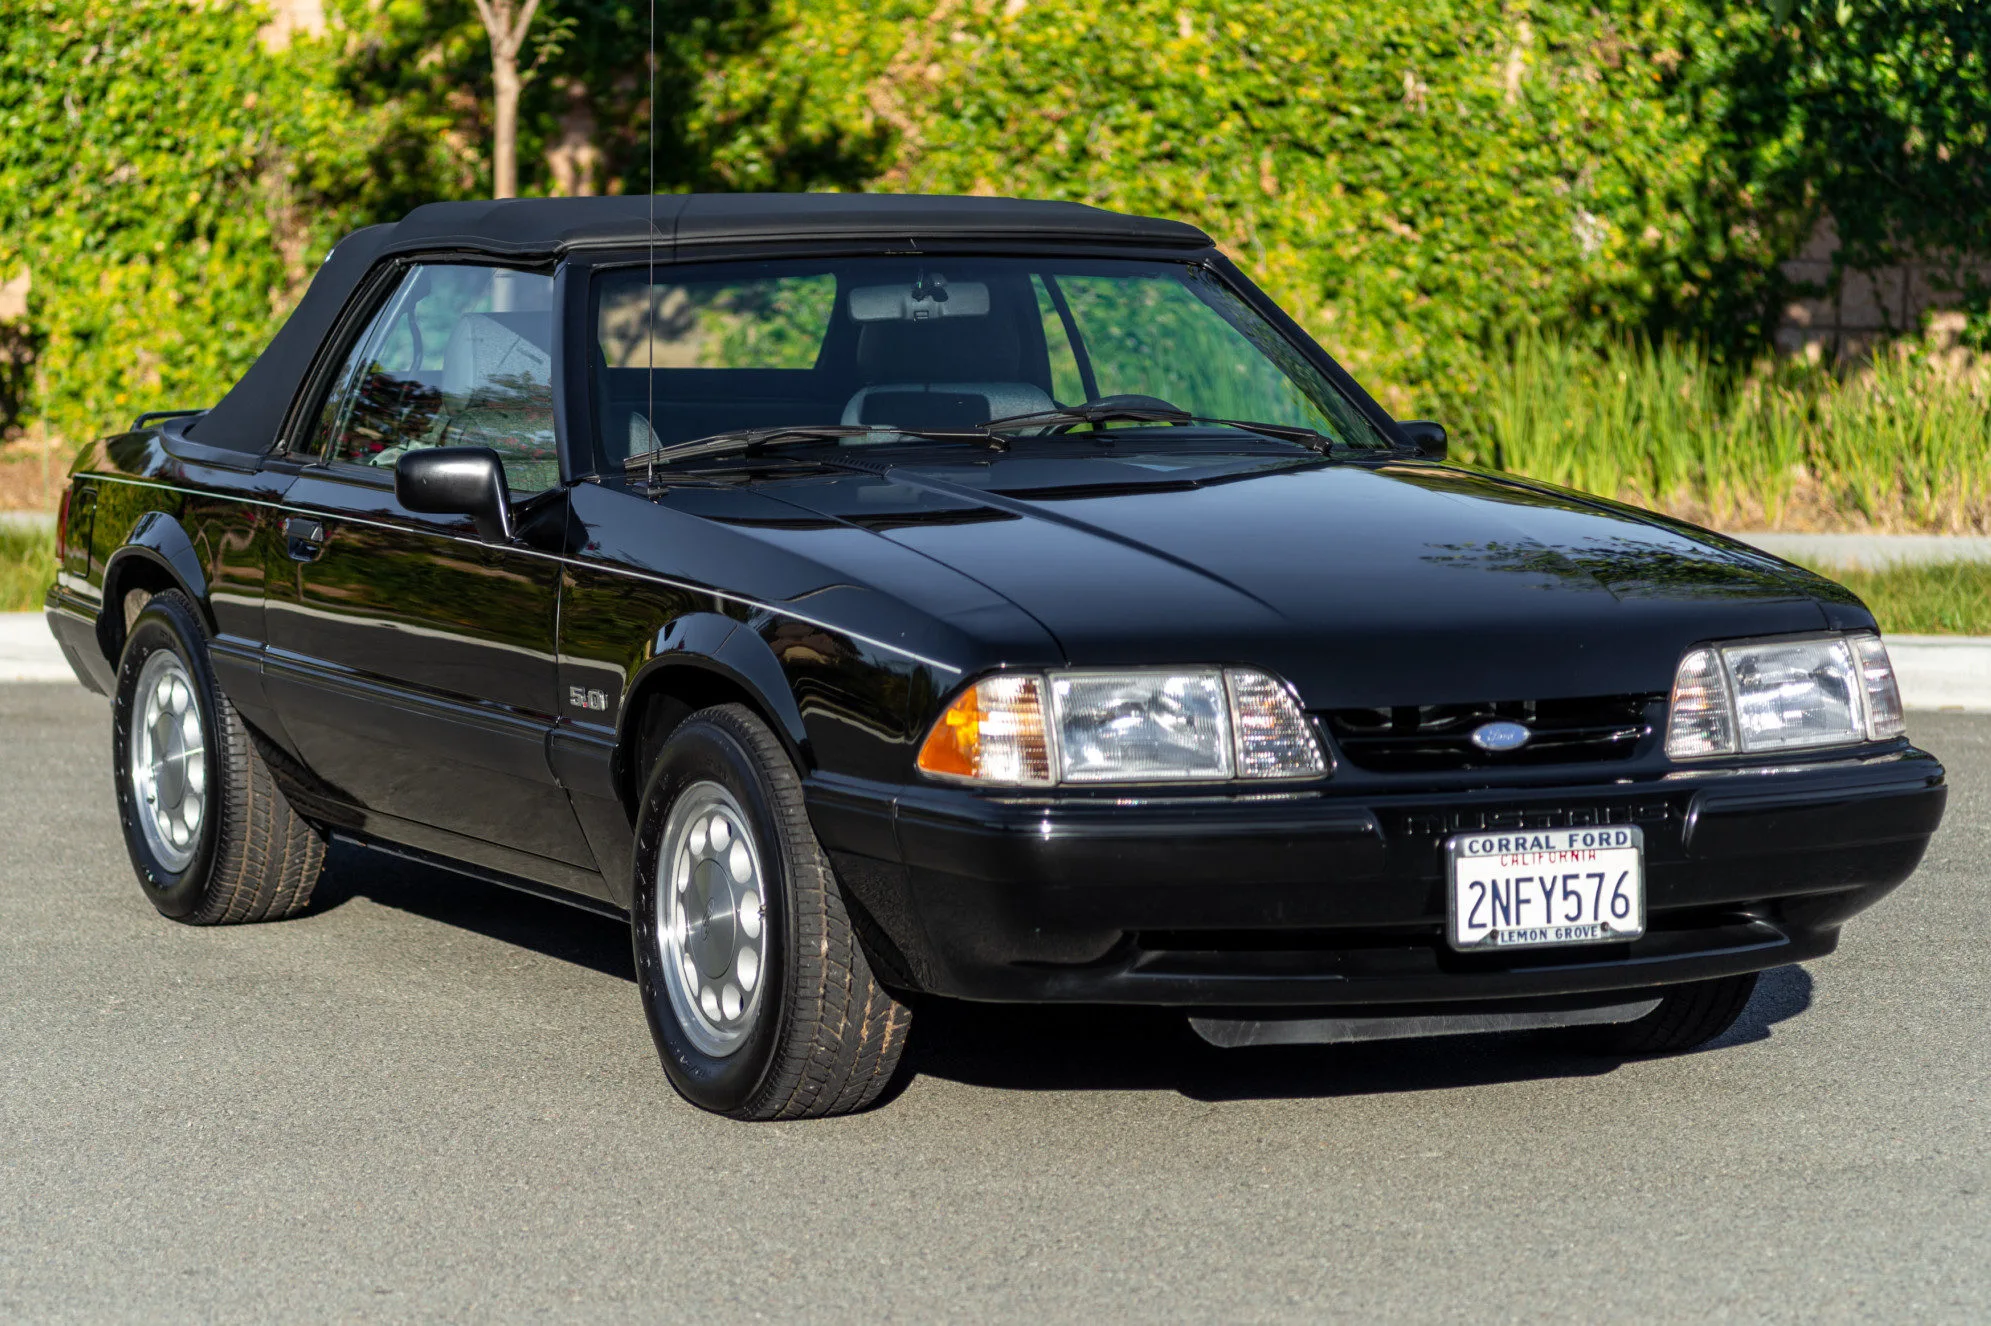 Mustang Of The Day: 1989 Ford Mustang LX 5.0L Sport